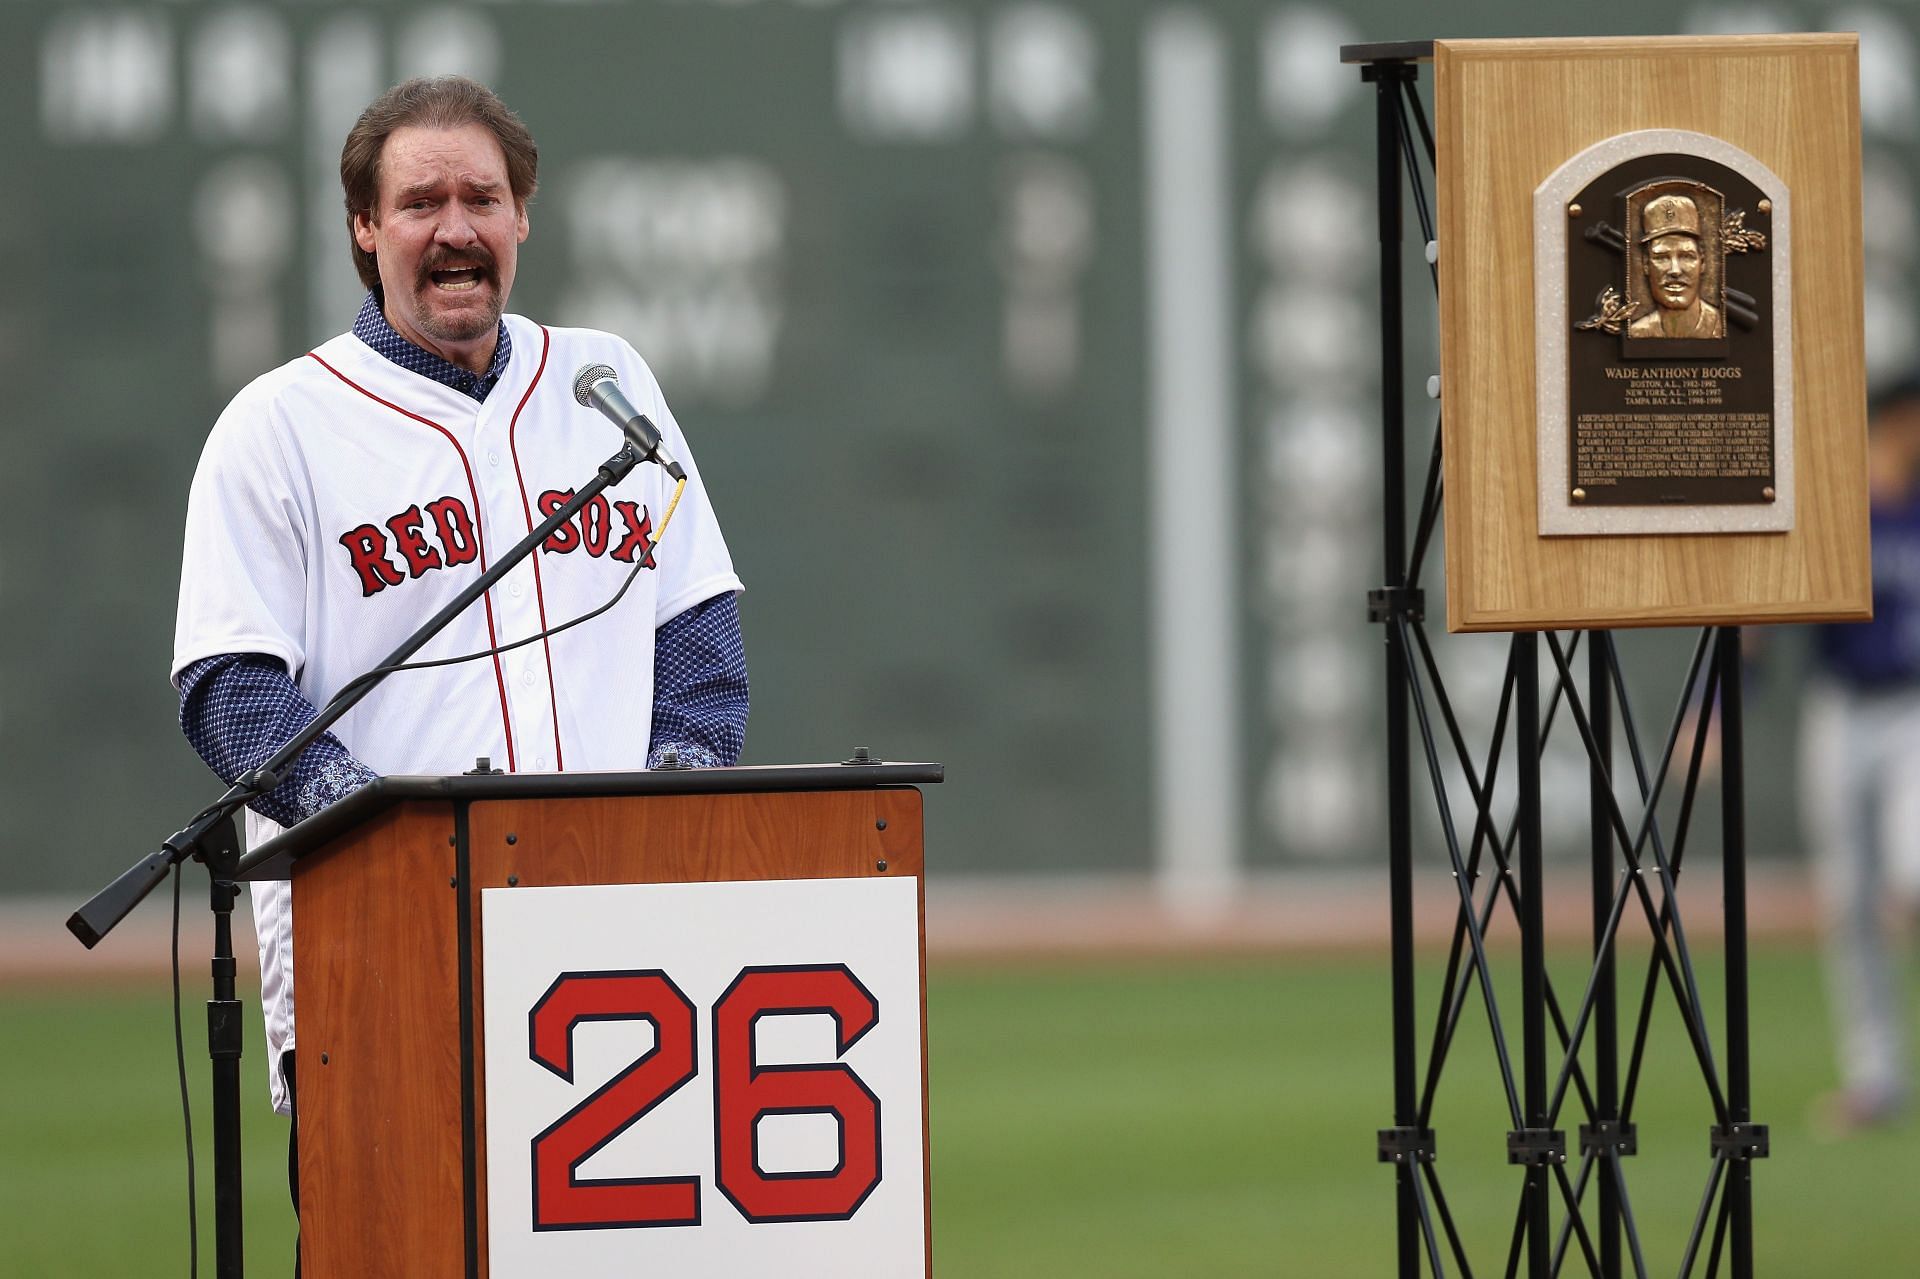 Hall of Famer Wade Boggs admits to bitterness over treatment by Red Sox